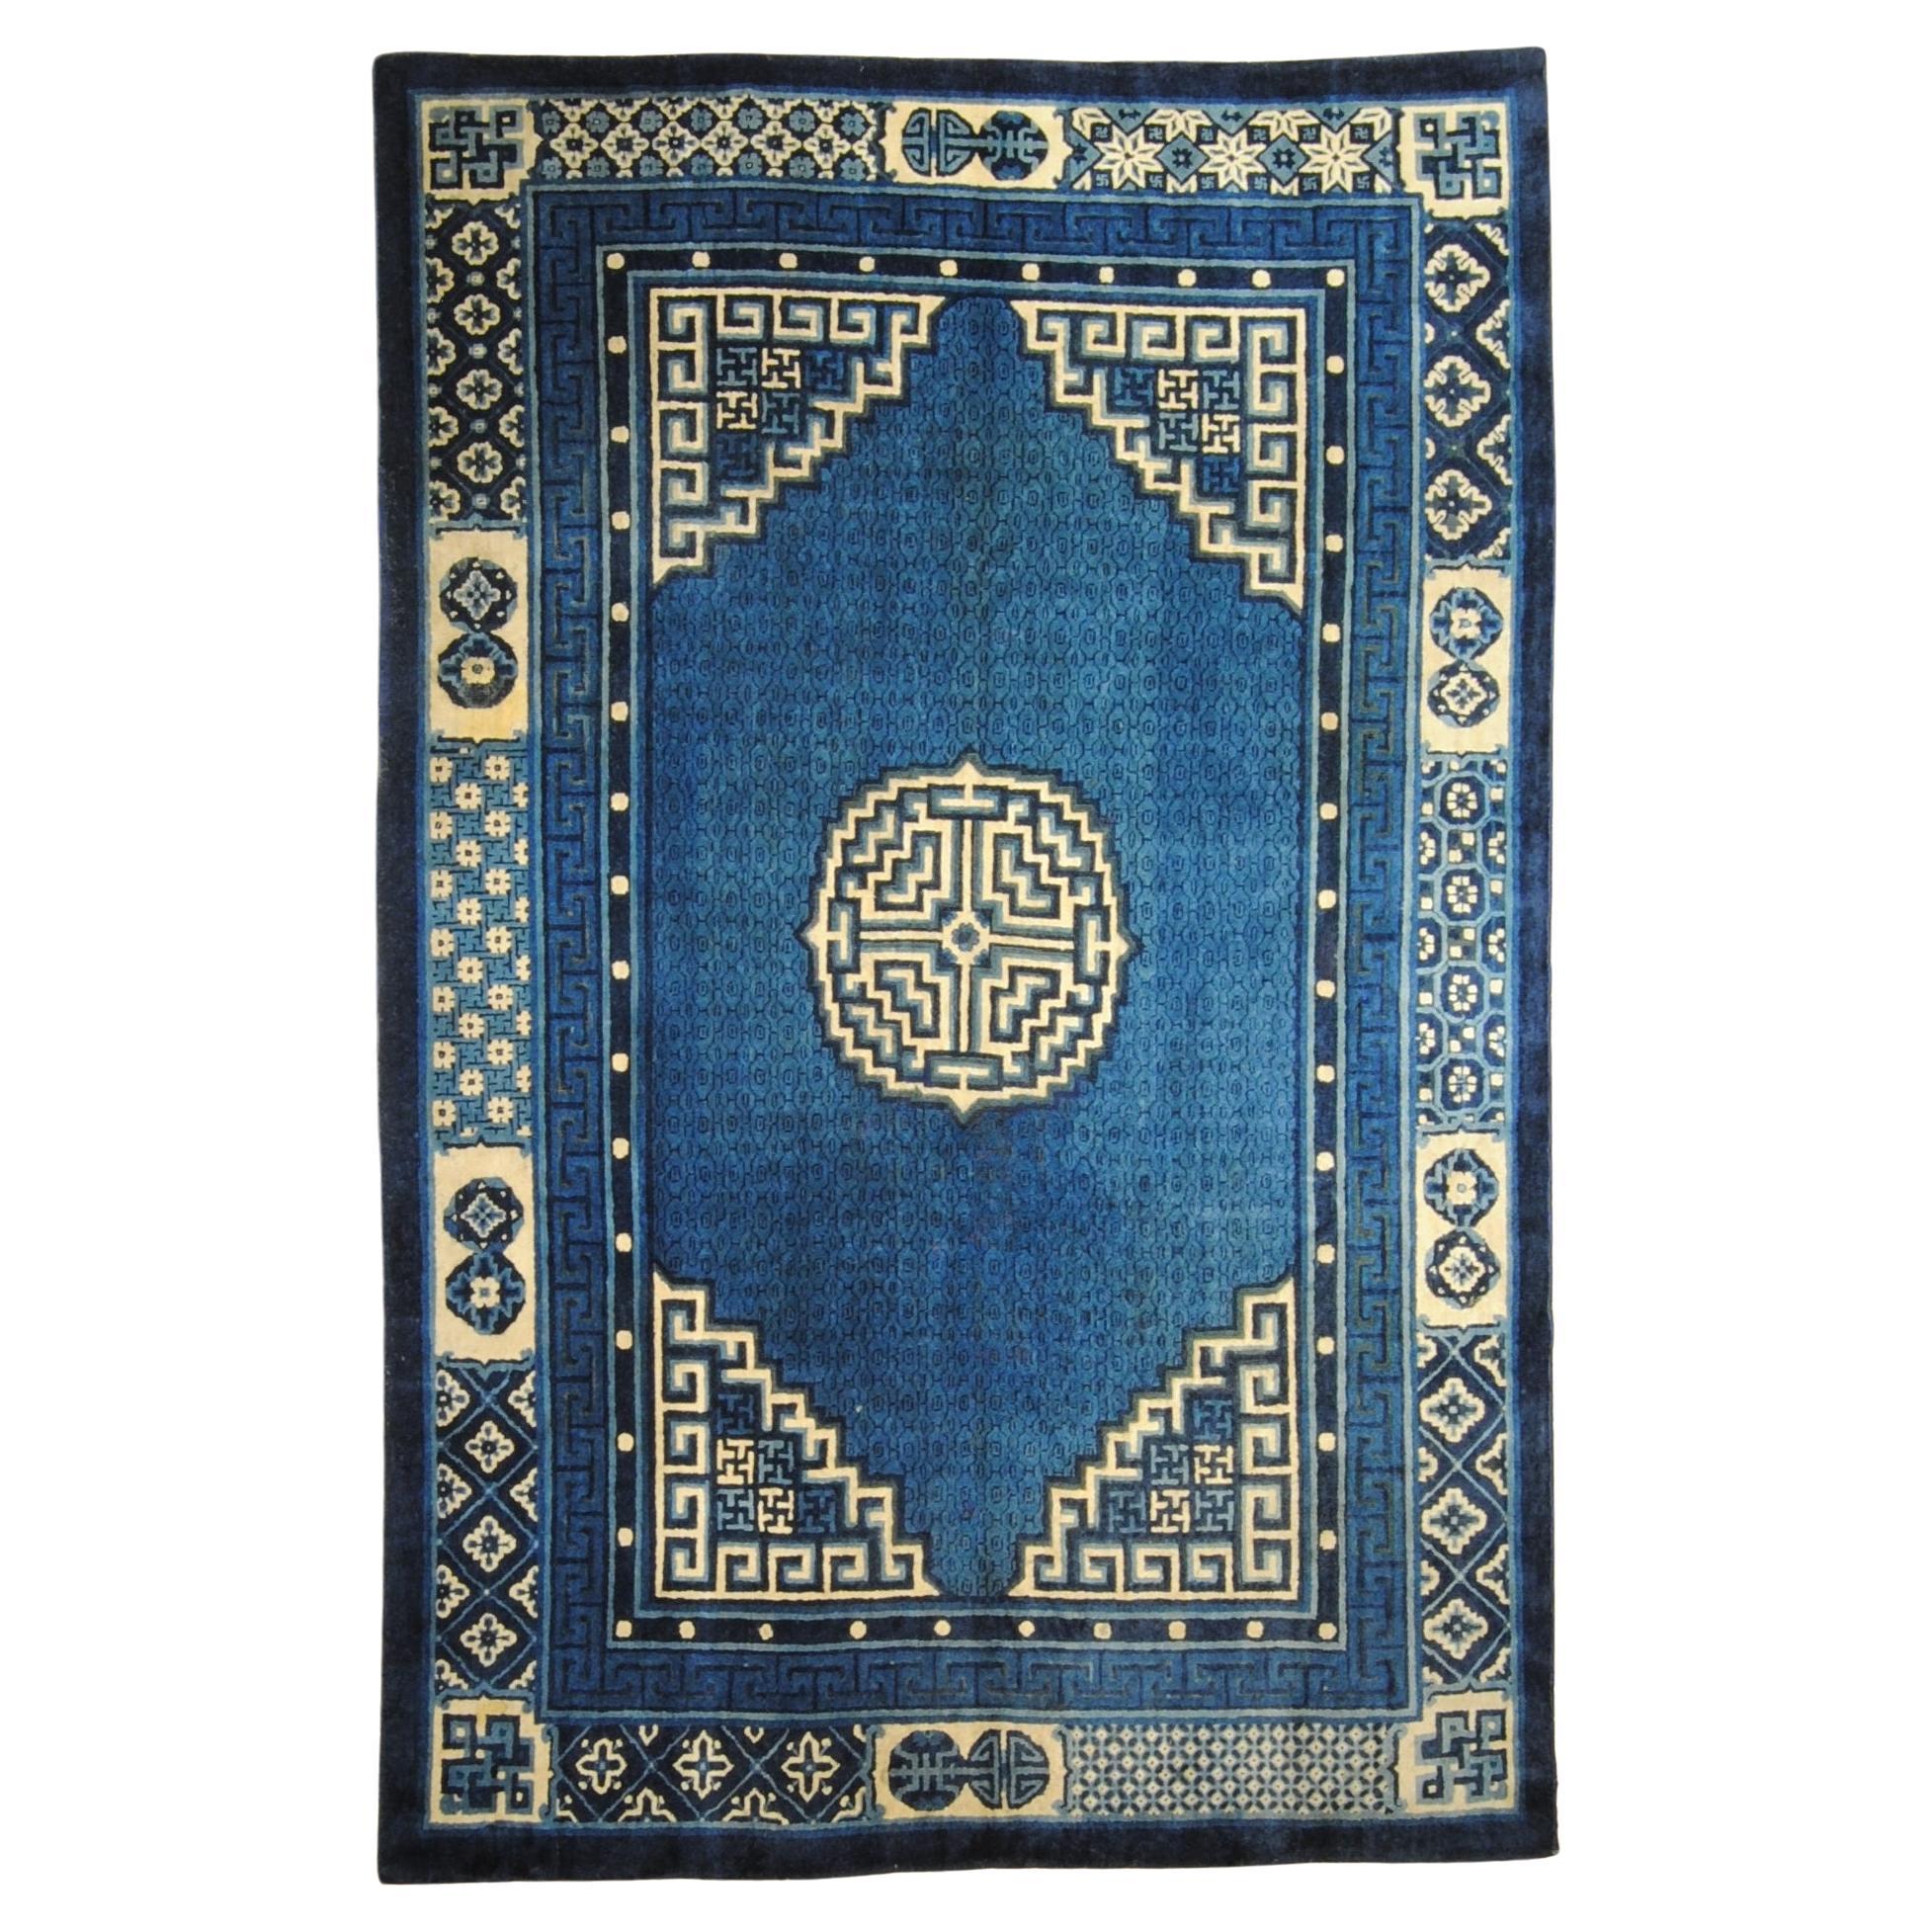 Early 20th Century Chinese Pao-Tao Carpet, Blue with Geometric Design